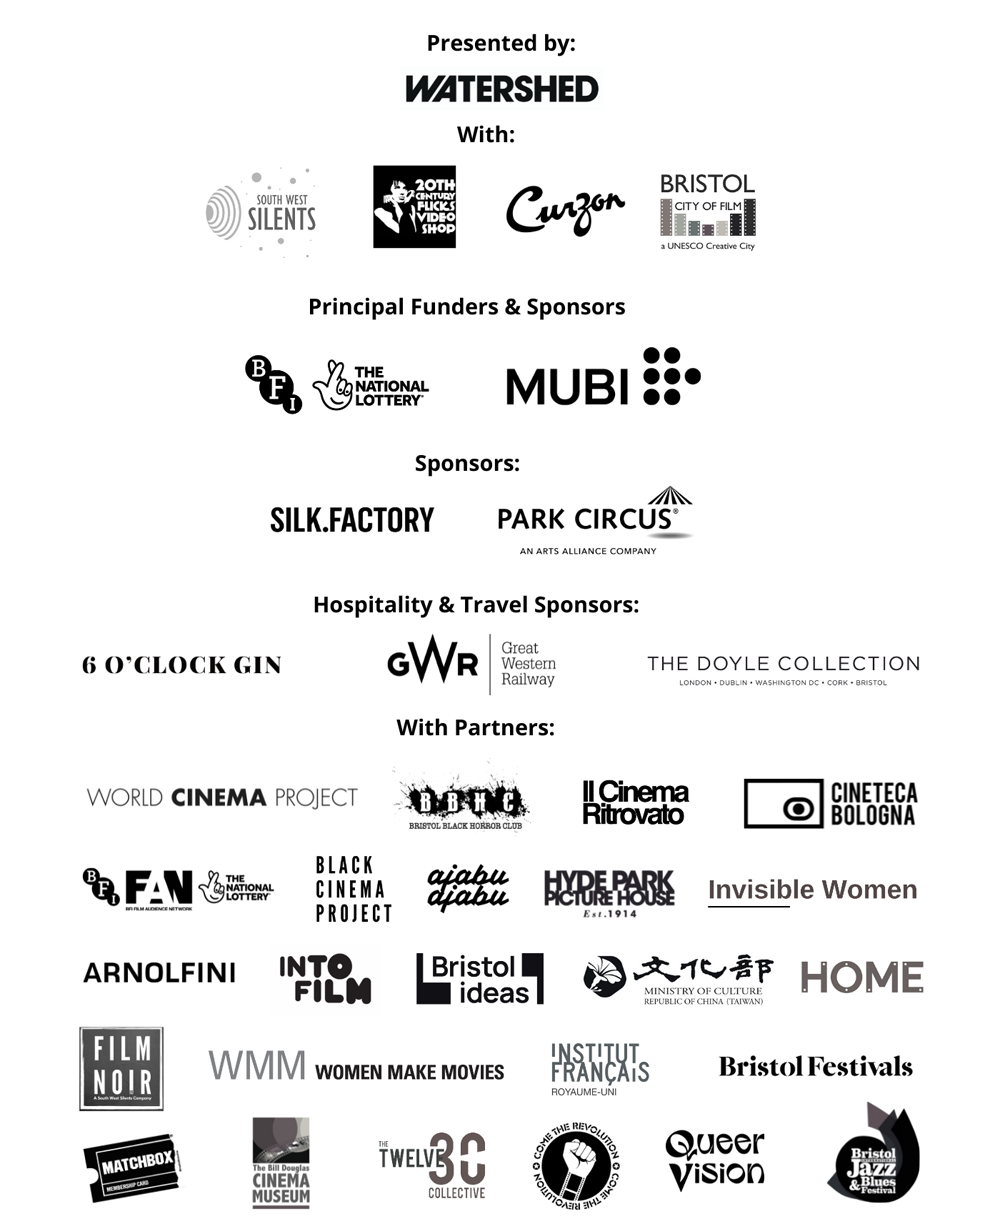 An image of all the partners and sponsors of Cinema Rediscovered 2022